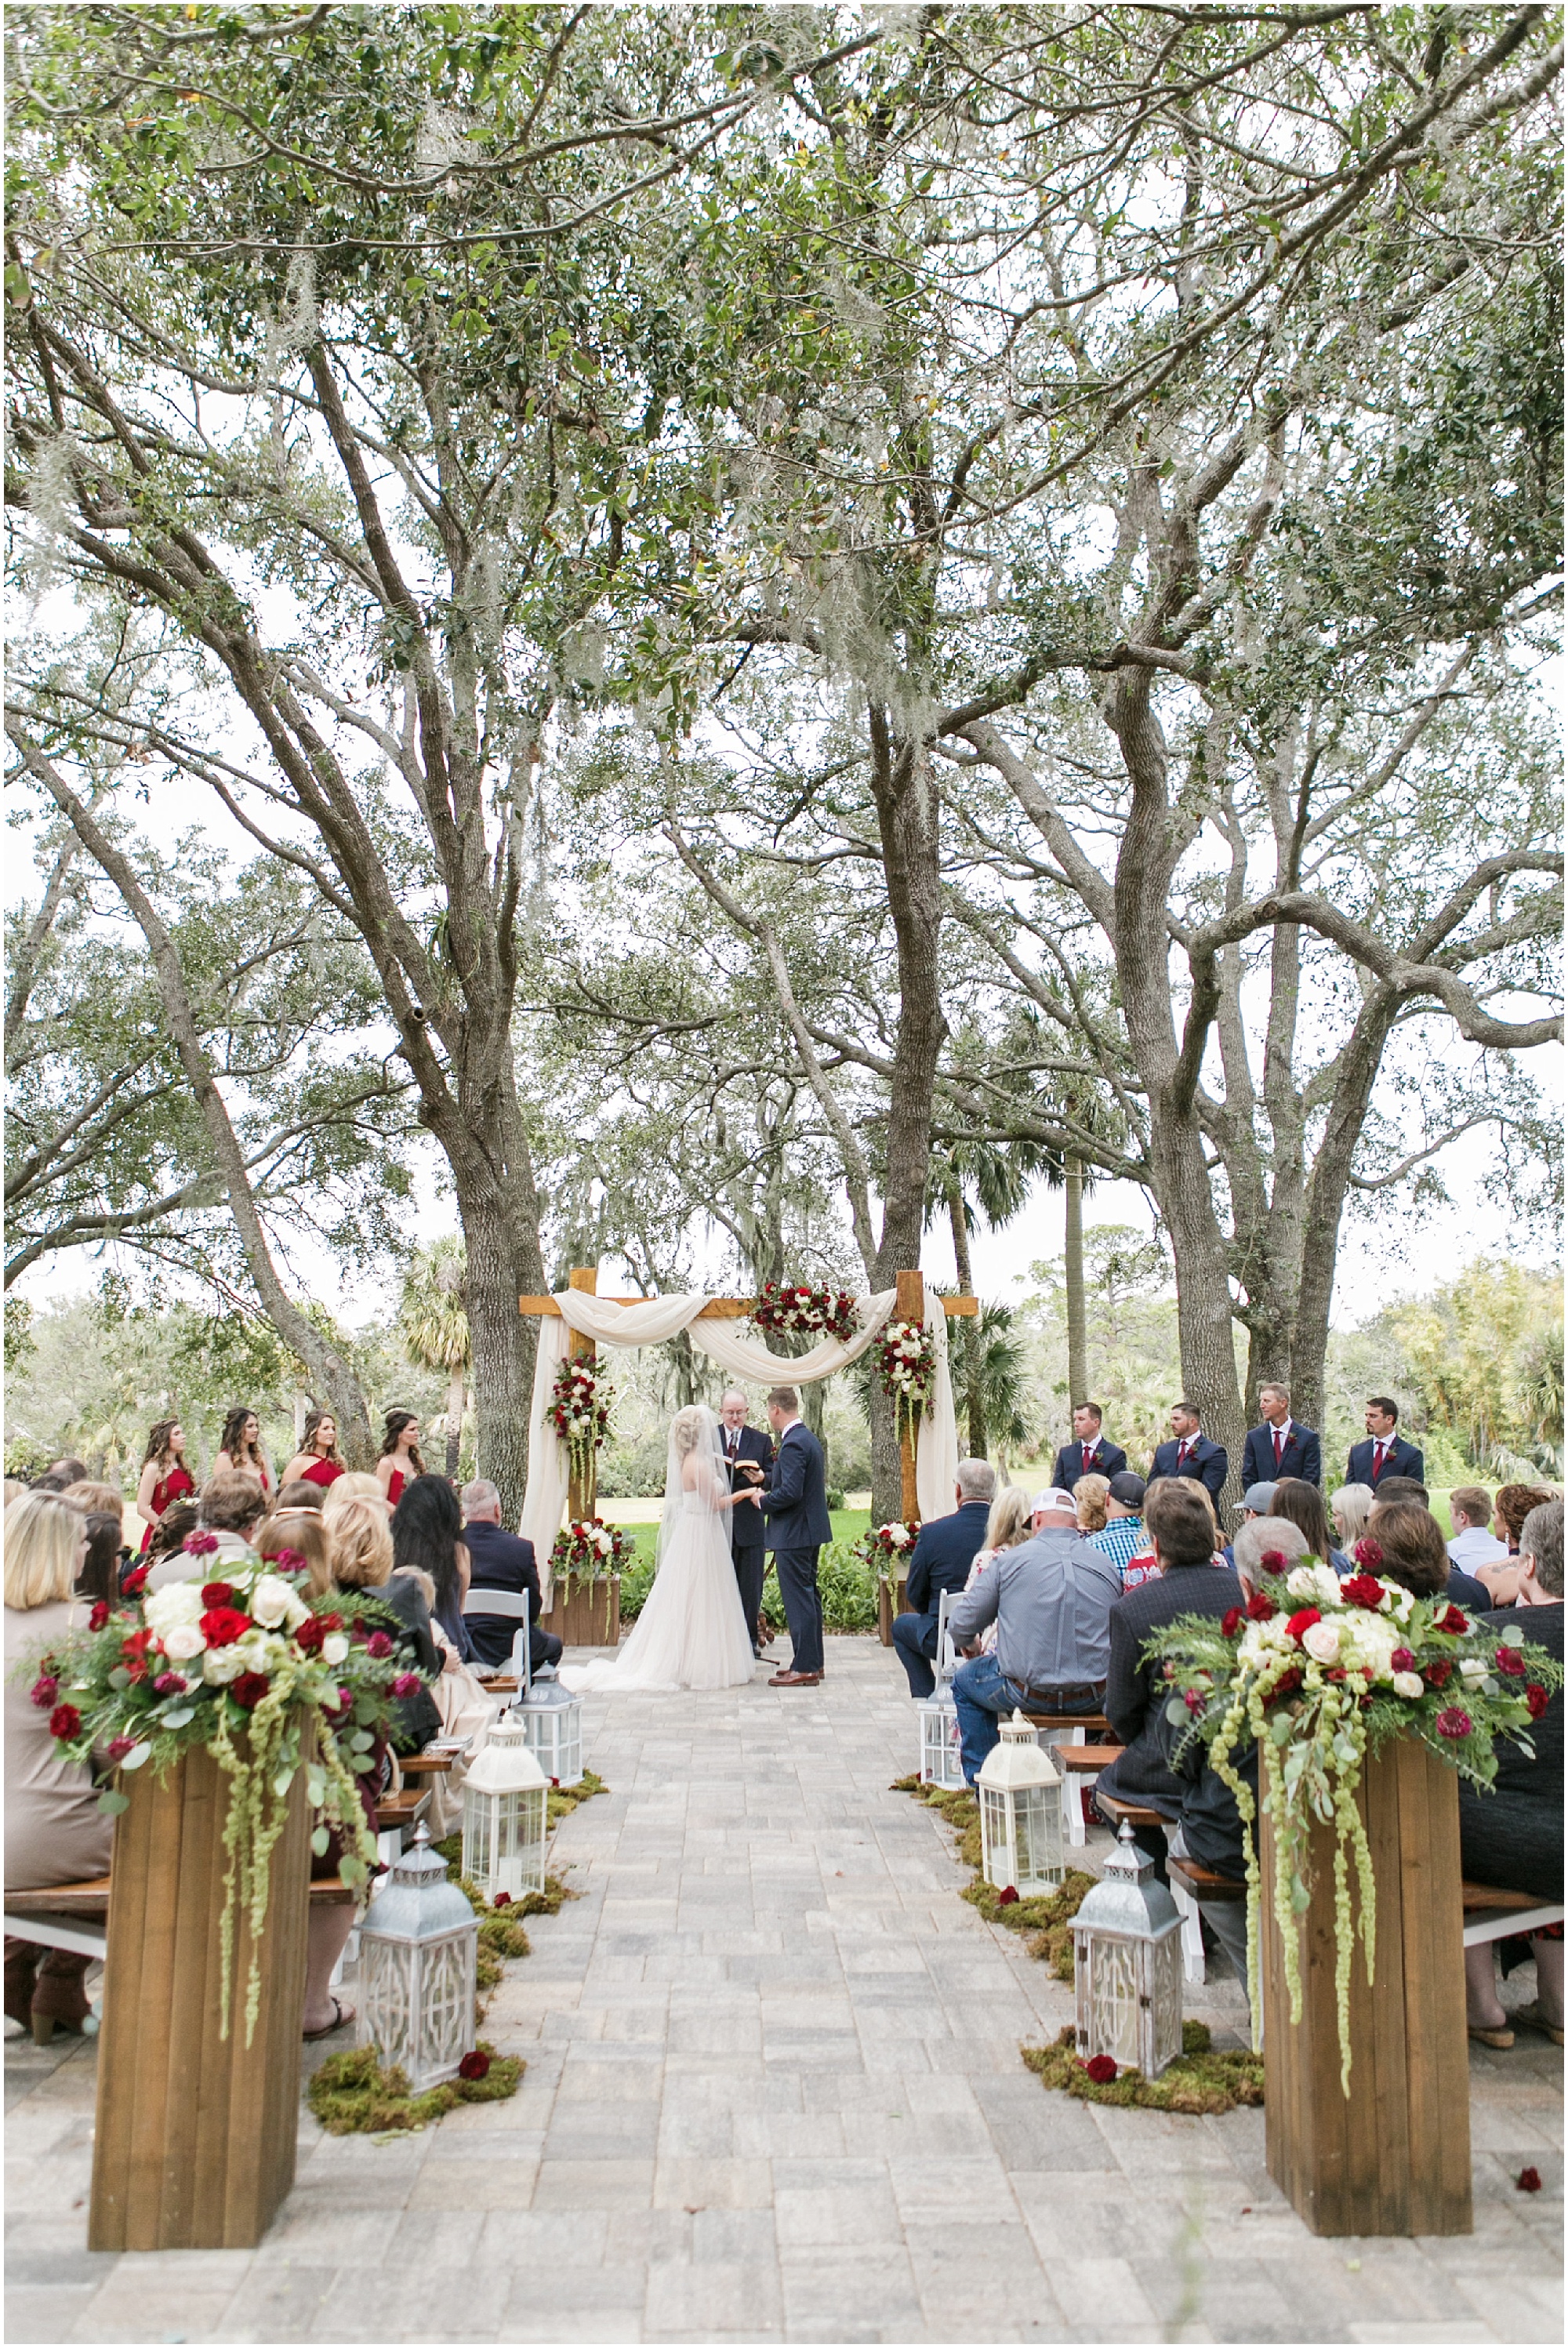 Ceremony site at Up the Creek Farms